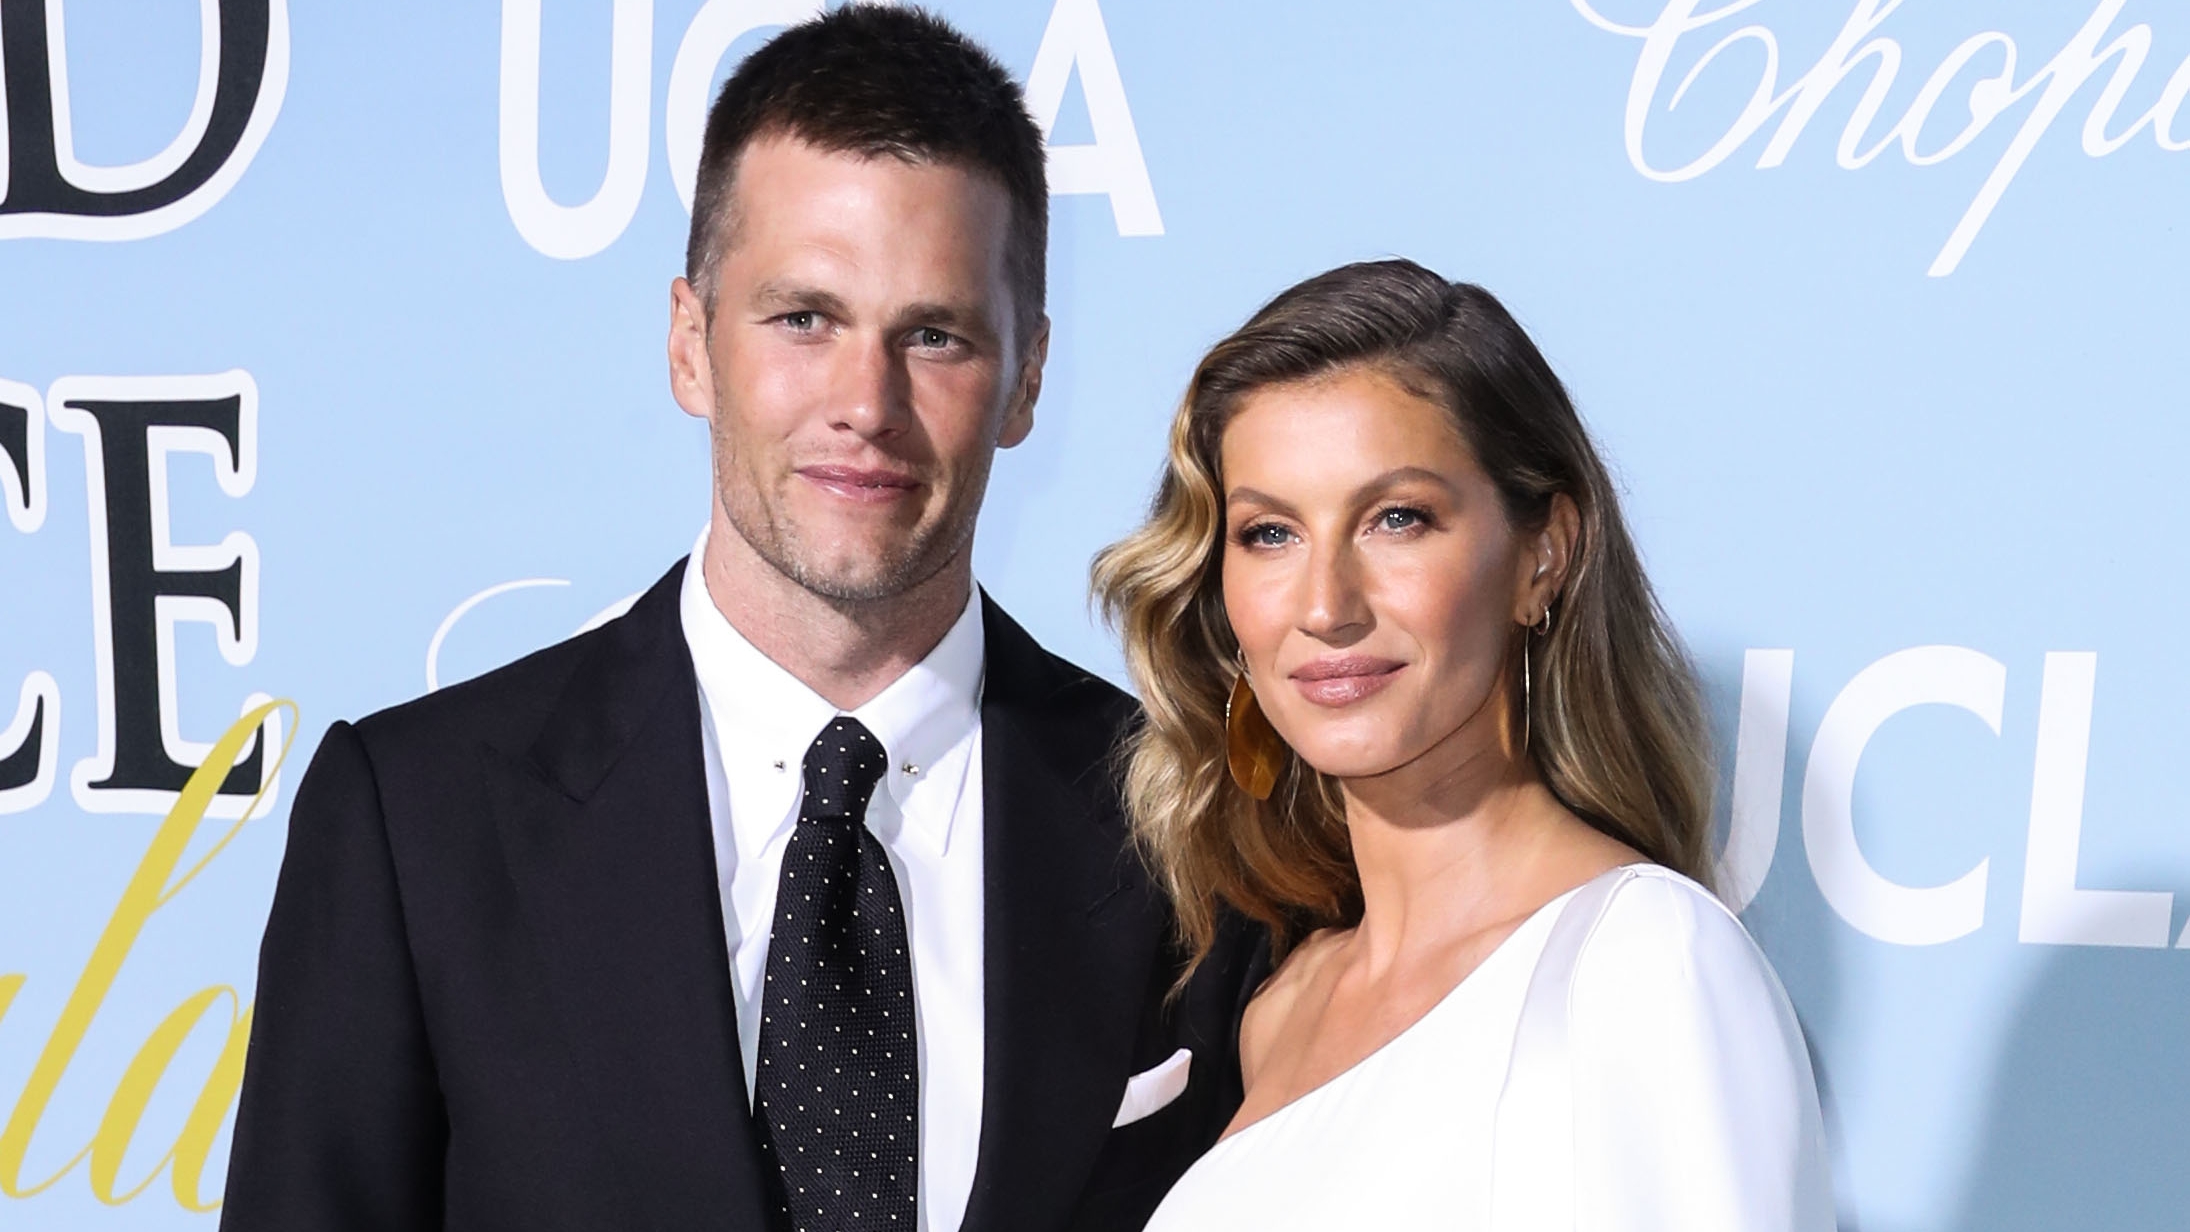 Tom Brady, Gisele Bündchen end their marriage after 13 years